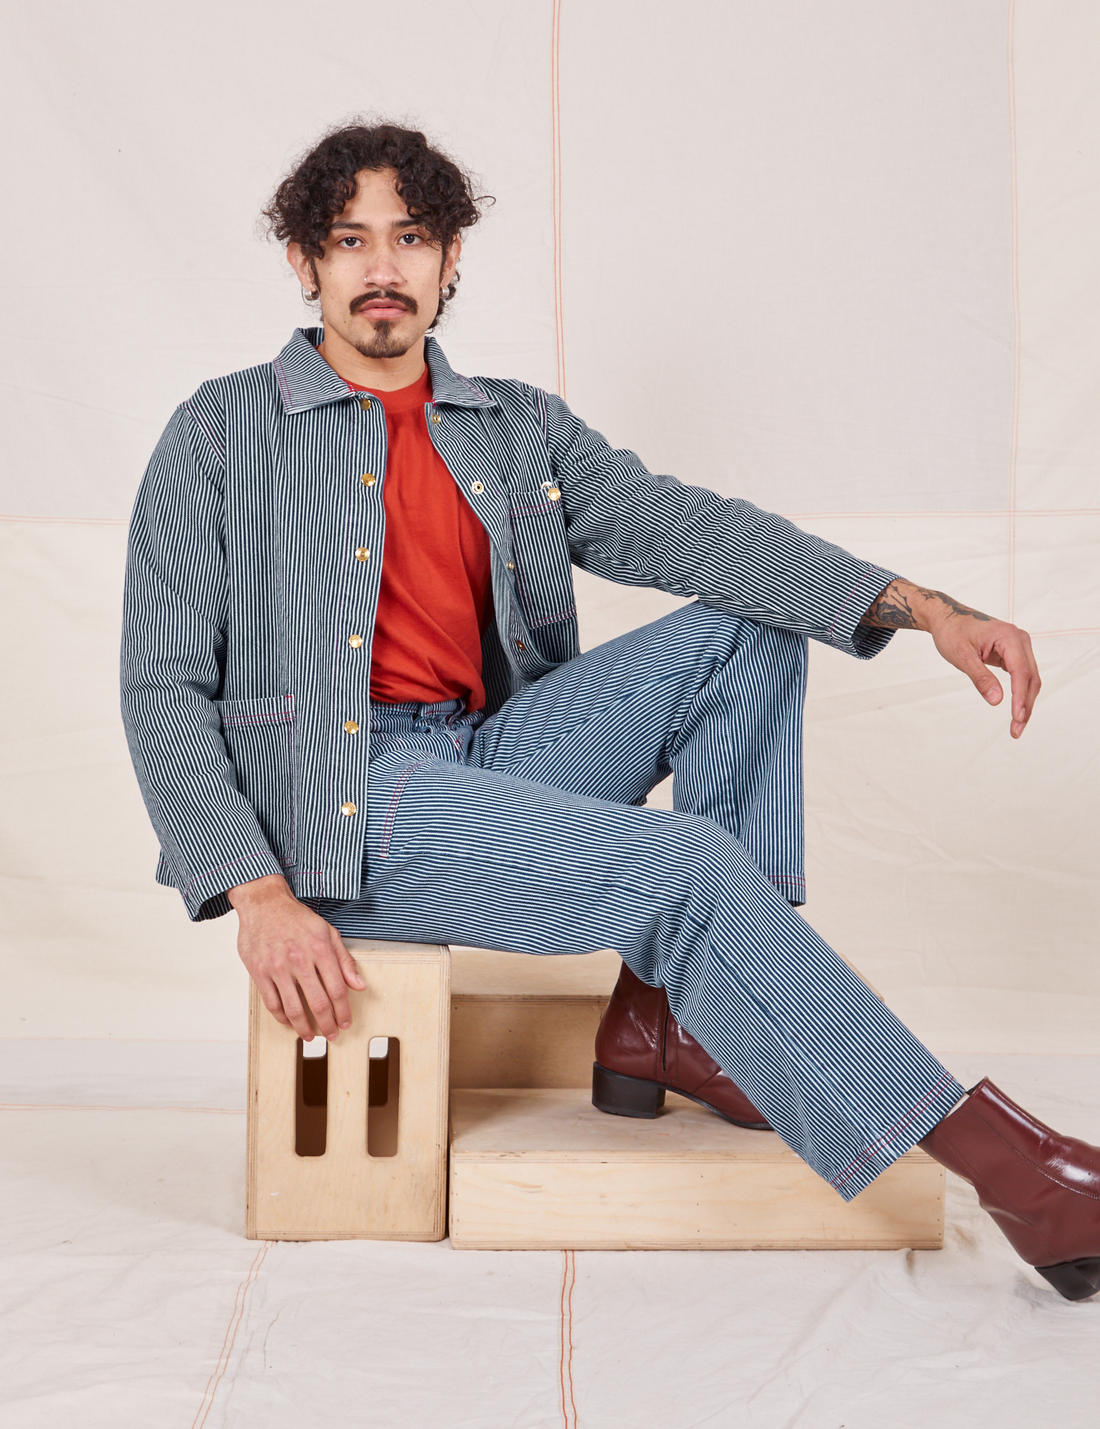 Jesse is sitting sideways on a wooden crate wearing Railroad Stripe Denim Work Jacket paired with matching Work Pants